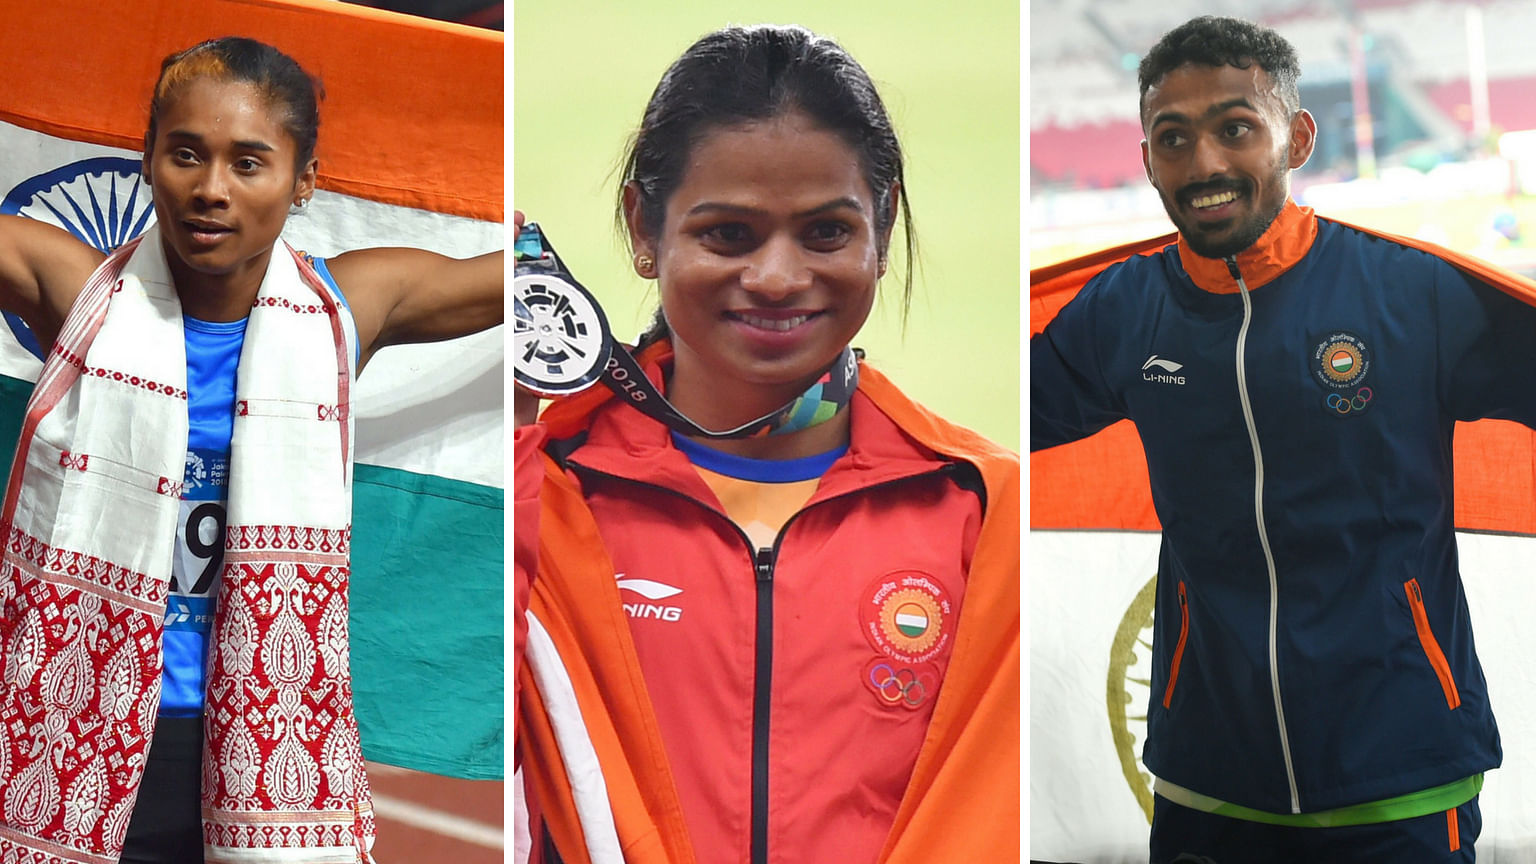 Hima Das, Dutee Chand and Muhammed Anas celebrate after winning their respective silver medals.